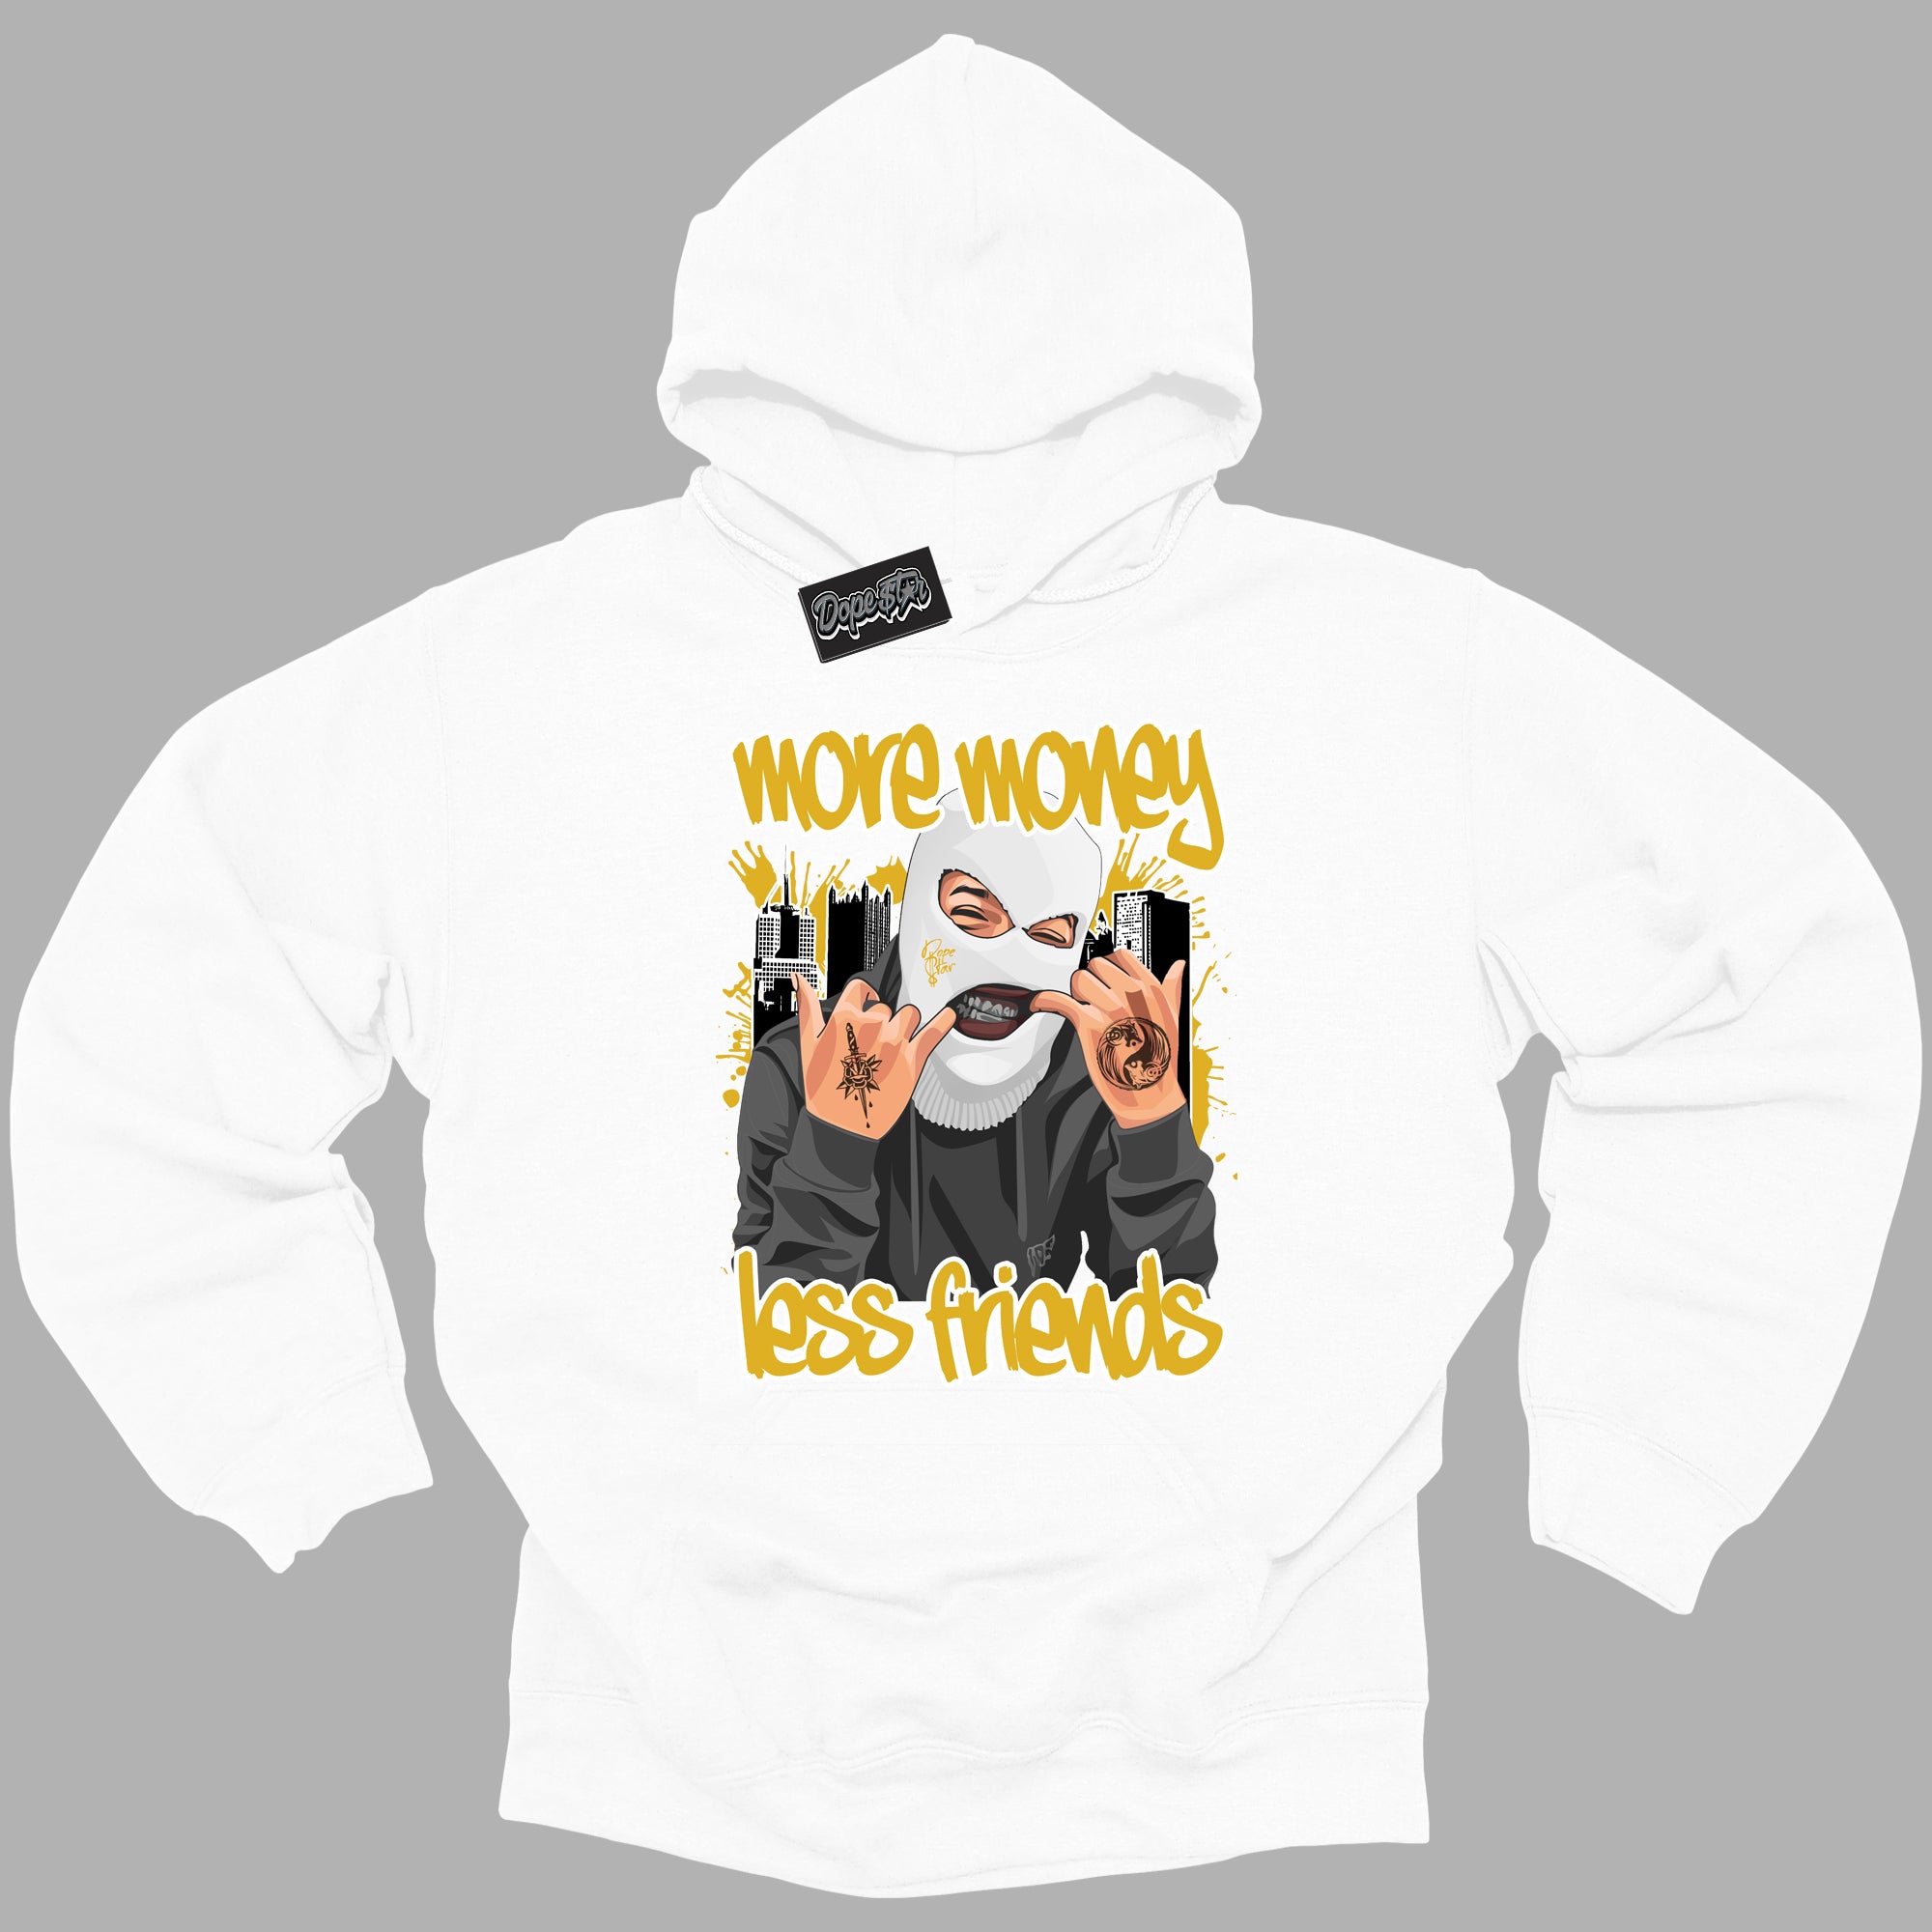 Cool White Hoodie with “More Money Less Friends ”  design that Perfectly Matches Yellow Ochre 6s Sneakers.